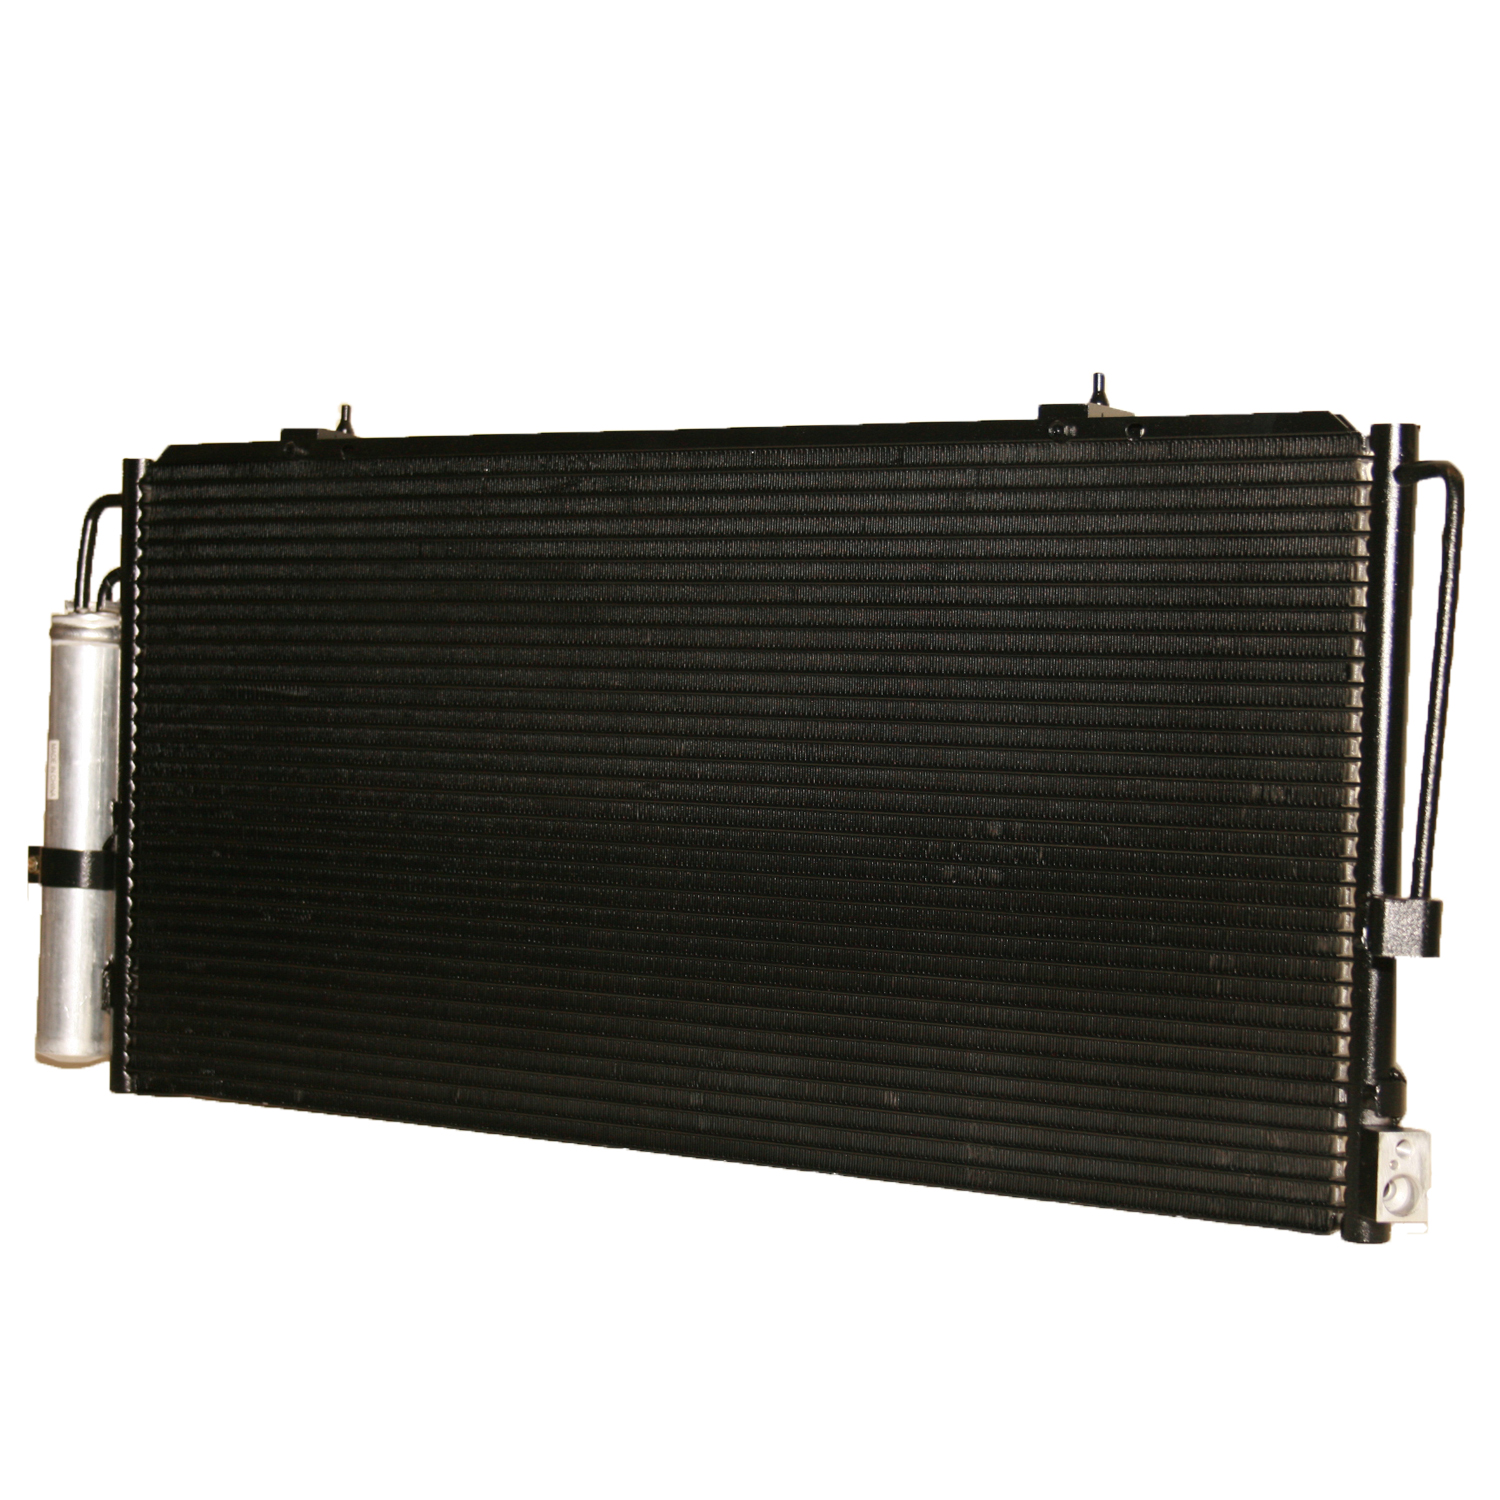 TCW Condenser 44-3392 New Product Image field_60b6a13a6e67c